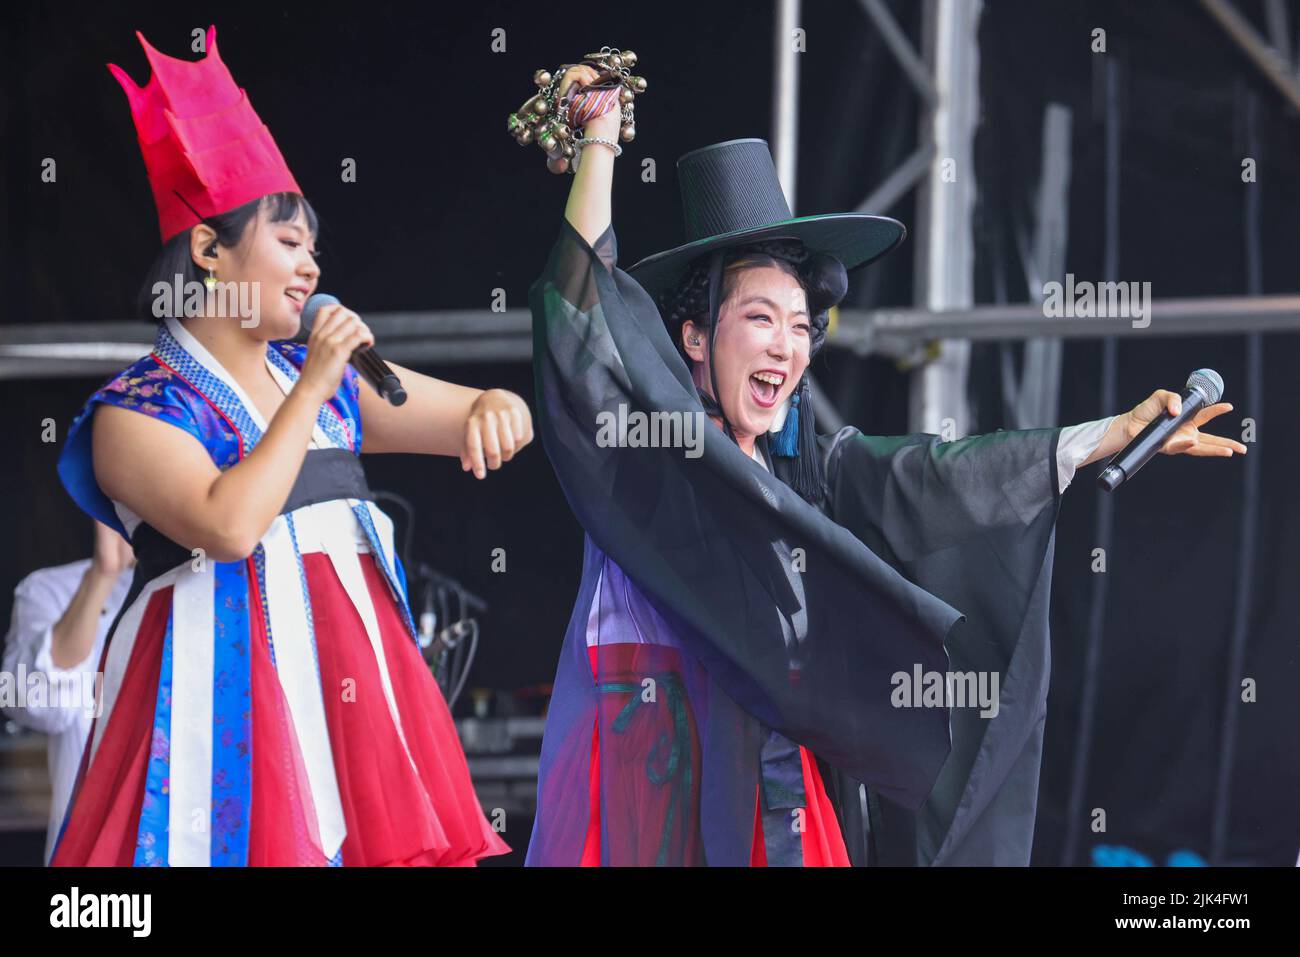 Malmesbury, Wiltshire, UK. 30th July 2022, Womad Festival, Charlton Park, Malmesbury, Wiltshire.  Korean folk-pop band ADG7 perform on the Open Air Stage.  The WOMAD Festival held its first event in 1982 at the Bath and West Showground in Shepton Mallet, Somerset. Over the intervening 40 years, the Peter Gabriel fronted organisation has hosted festivals across the globe, from Spain to New Zealand, Chile to Abu Dhabi. For the 40th anniversary its flagship UK festival is held this weekend from 28-30 July at Charlton Park. WOMAD - World of Music, Arts and Dance. Credit: Casper Farrell Photography Stock Photo